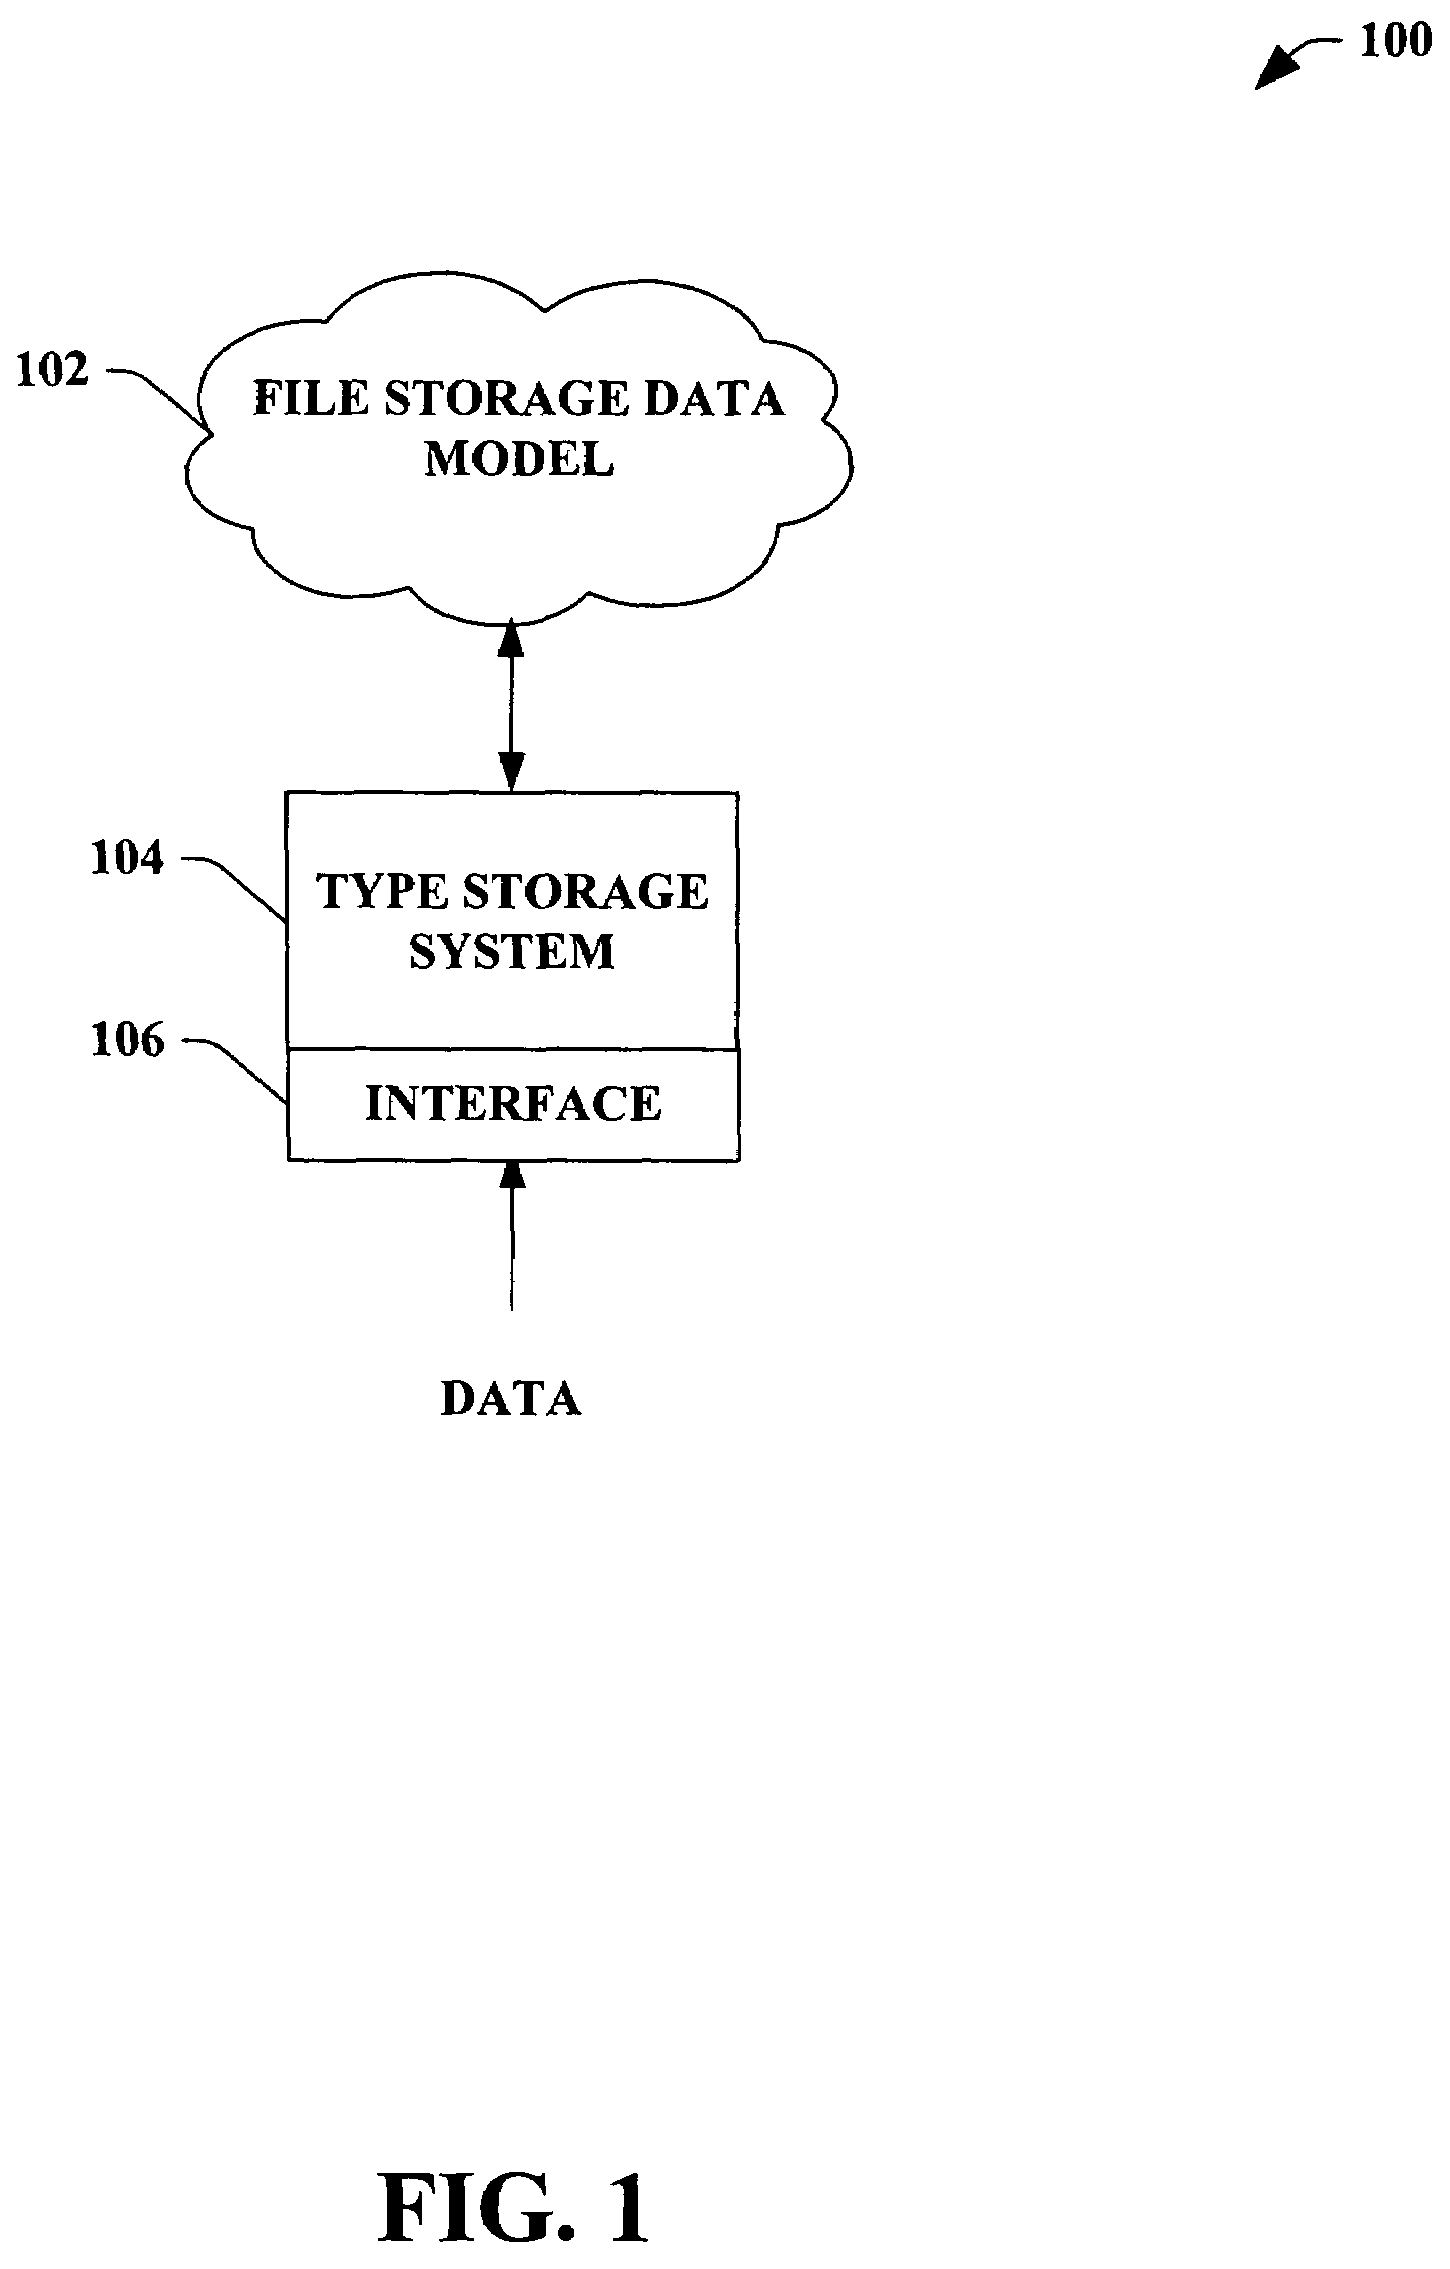 Mapping of a file system model to a database object